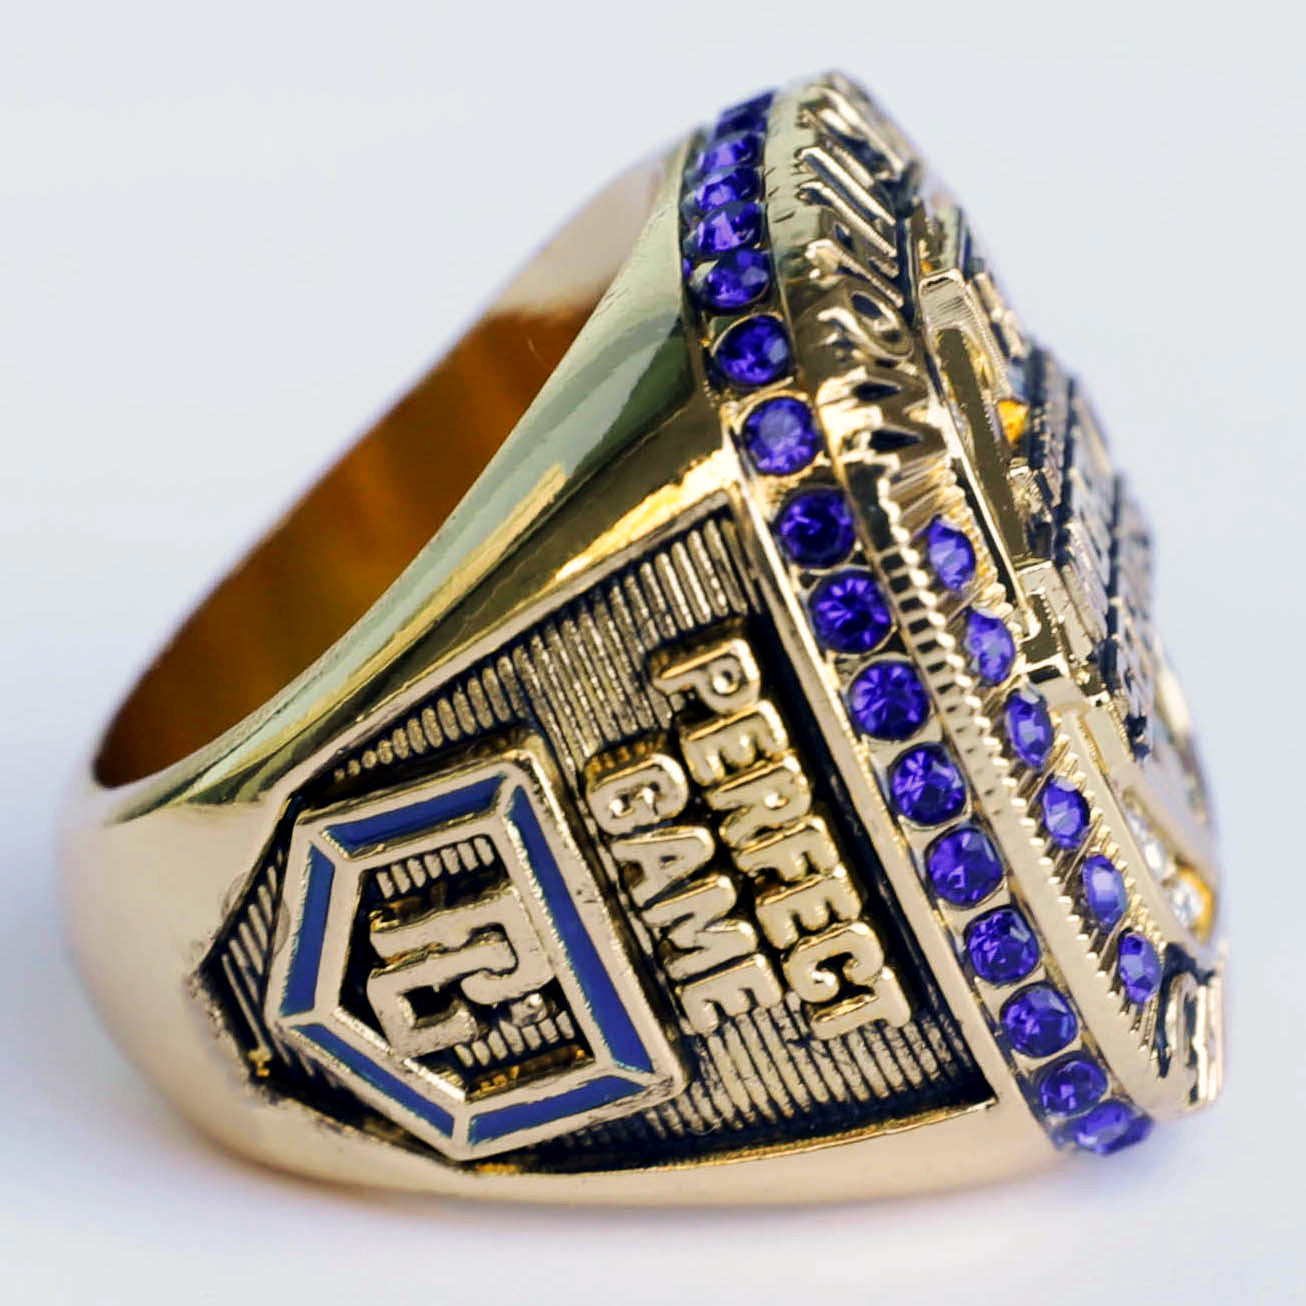 2021 World Championship Rings officially presented to EDG